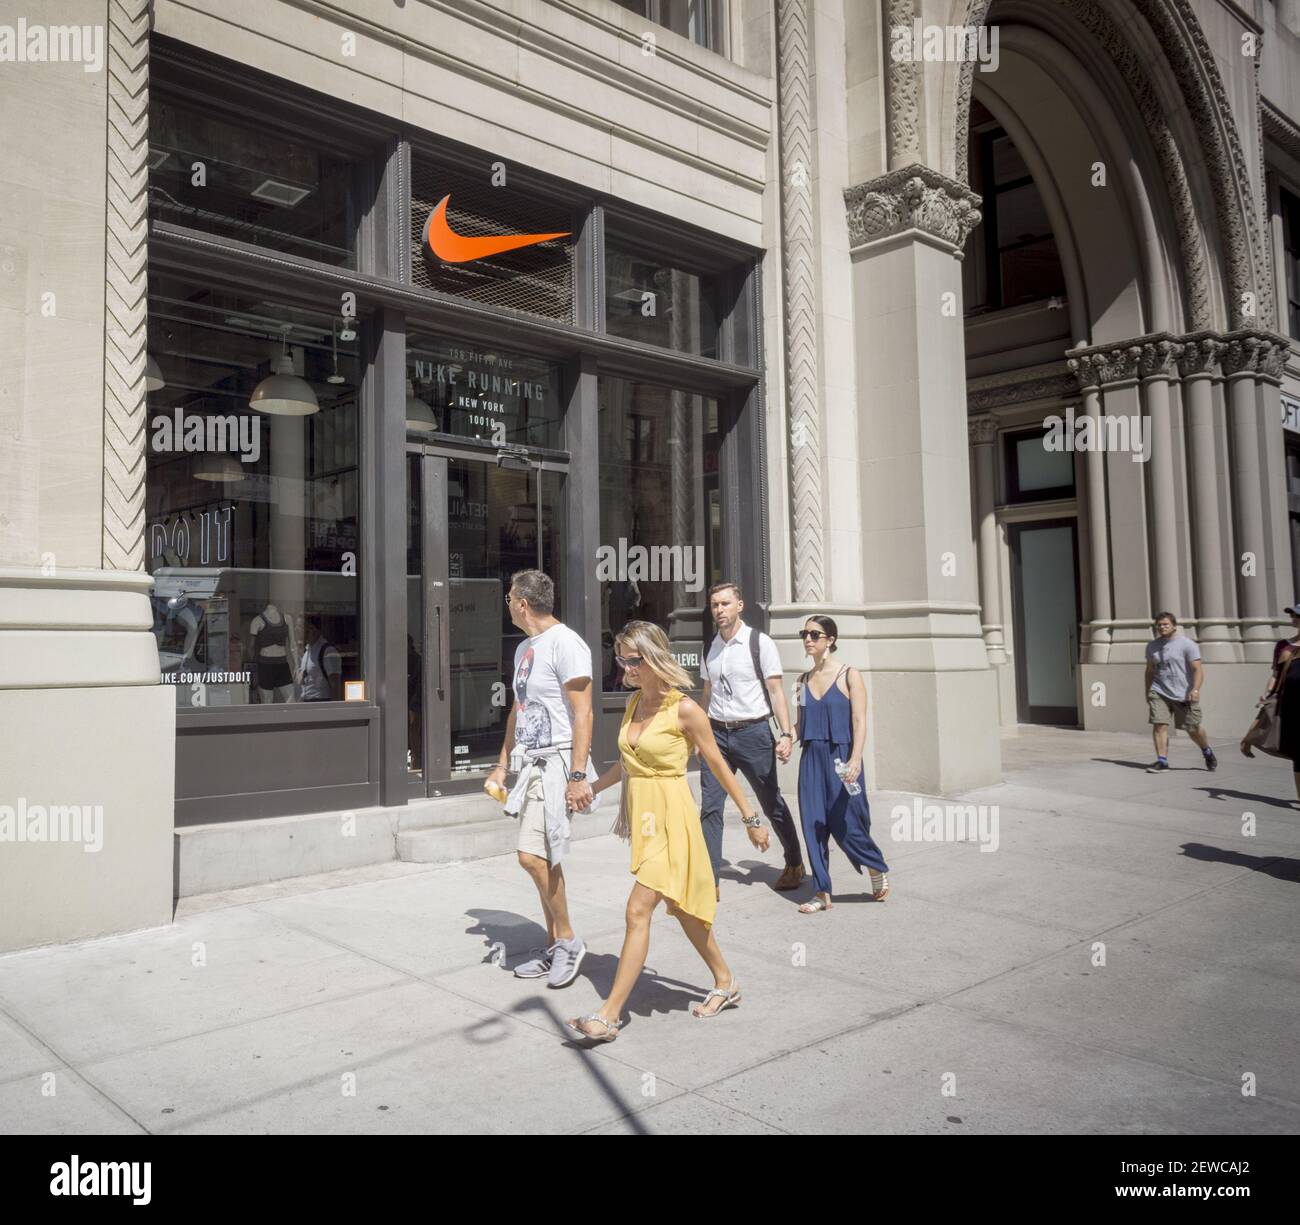 A Nike store in the Flatiron district in New York on Saturday, August 26,  2017. Nike announced promotions related to growing its Consumer Direct  Acceleration plan, growing the brands digital footprint in